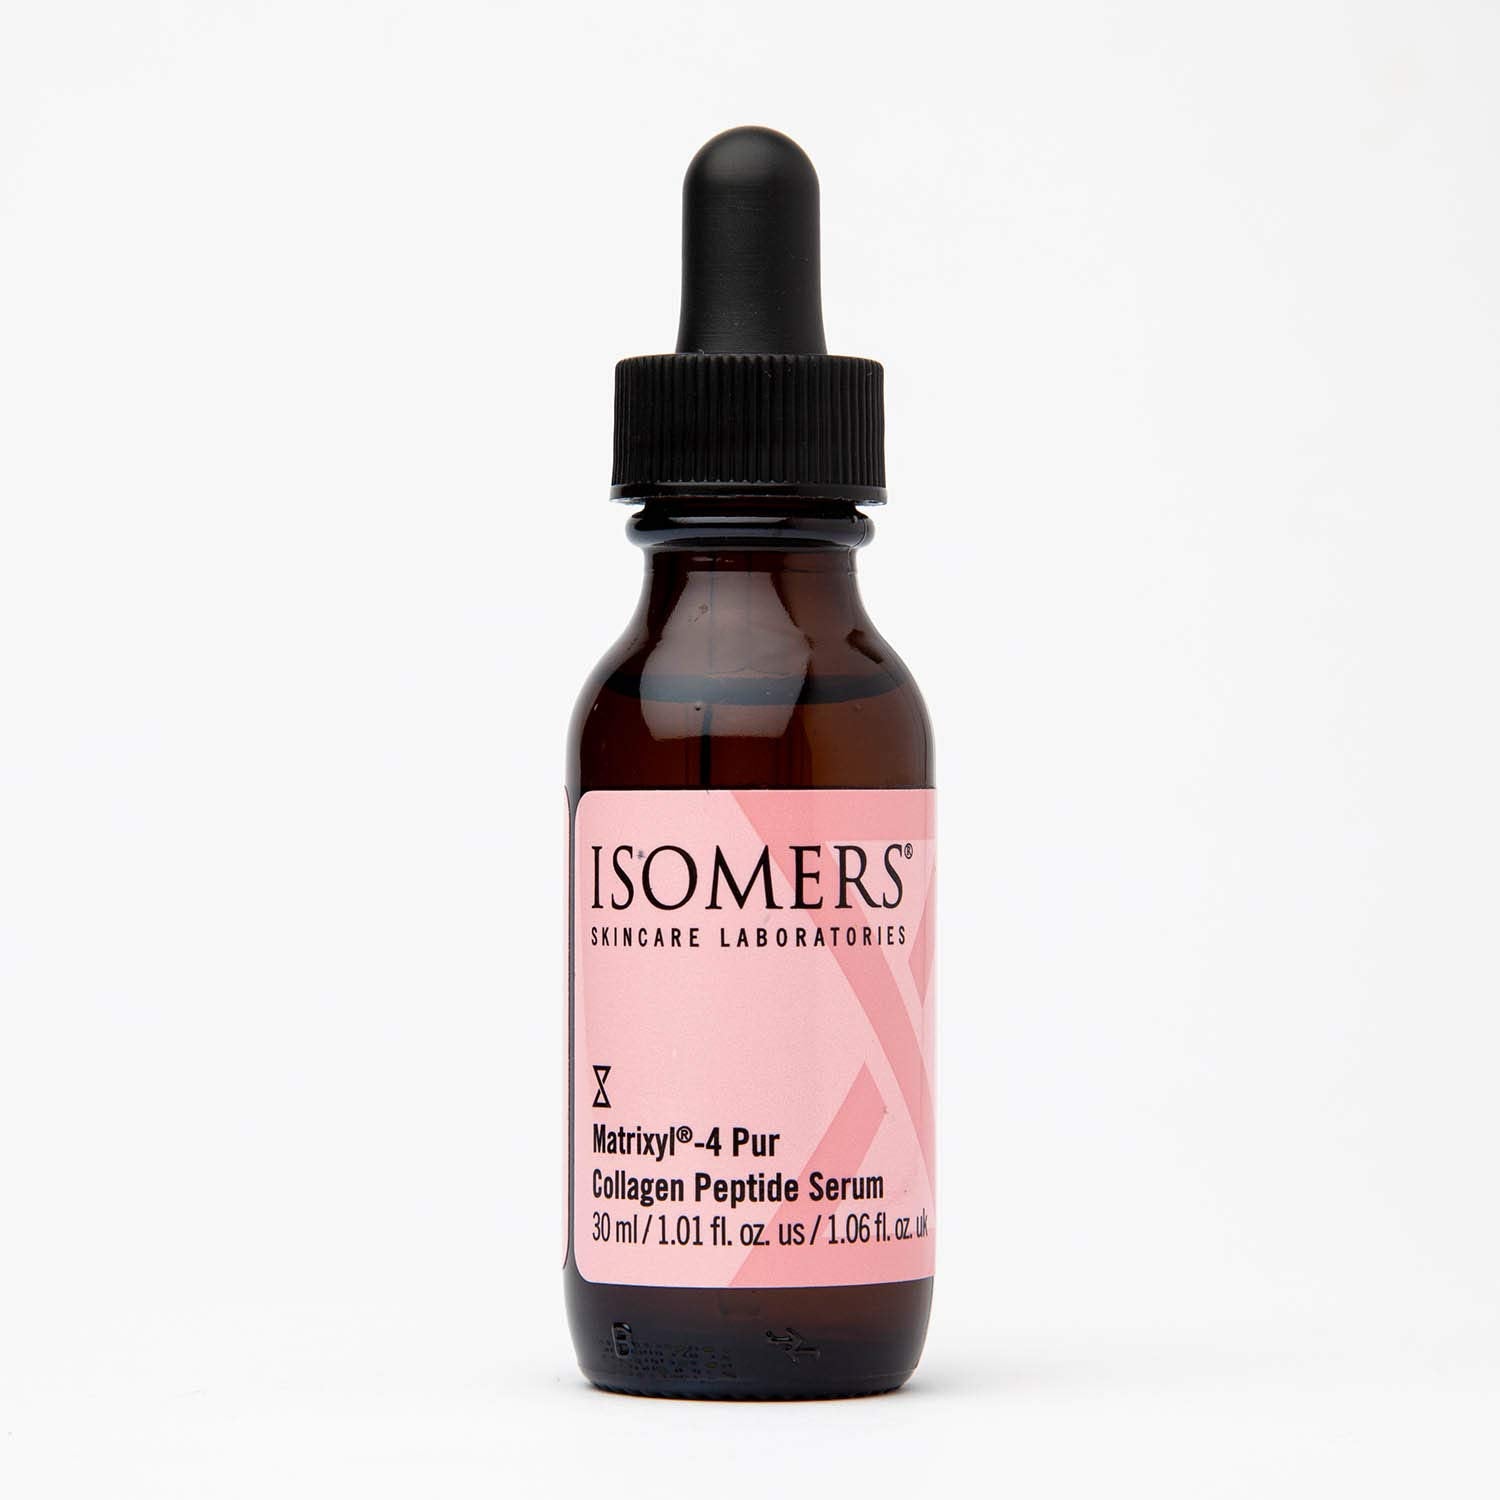 ISOMERS Matrixyl-4 Pur Collagen Peptide Serum - Anti Wrinkle Face Serum, Radiant Skin + Defines Facial Contours & Increase Firmness, 30